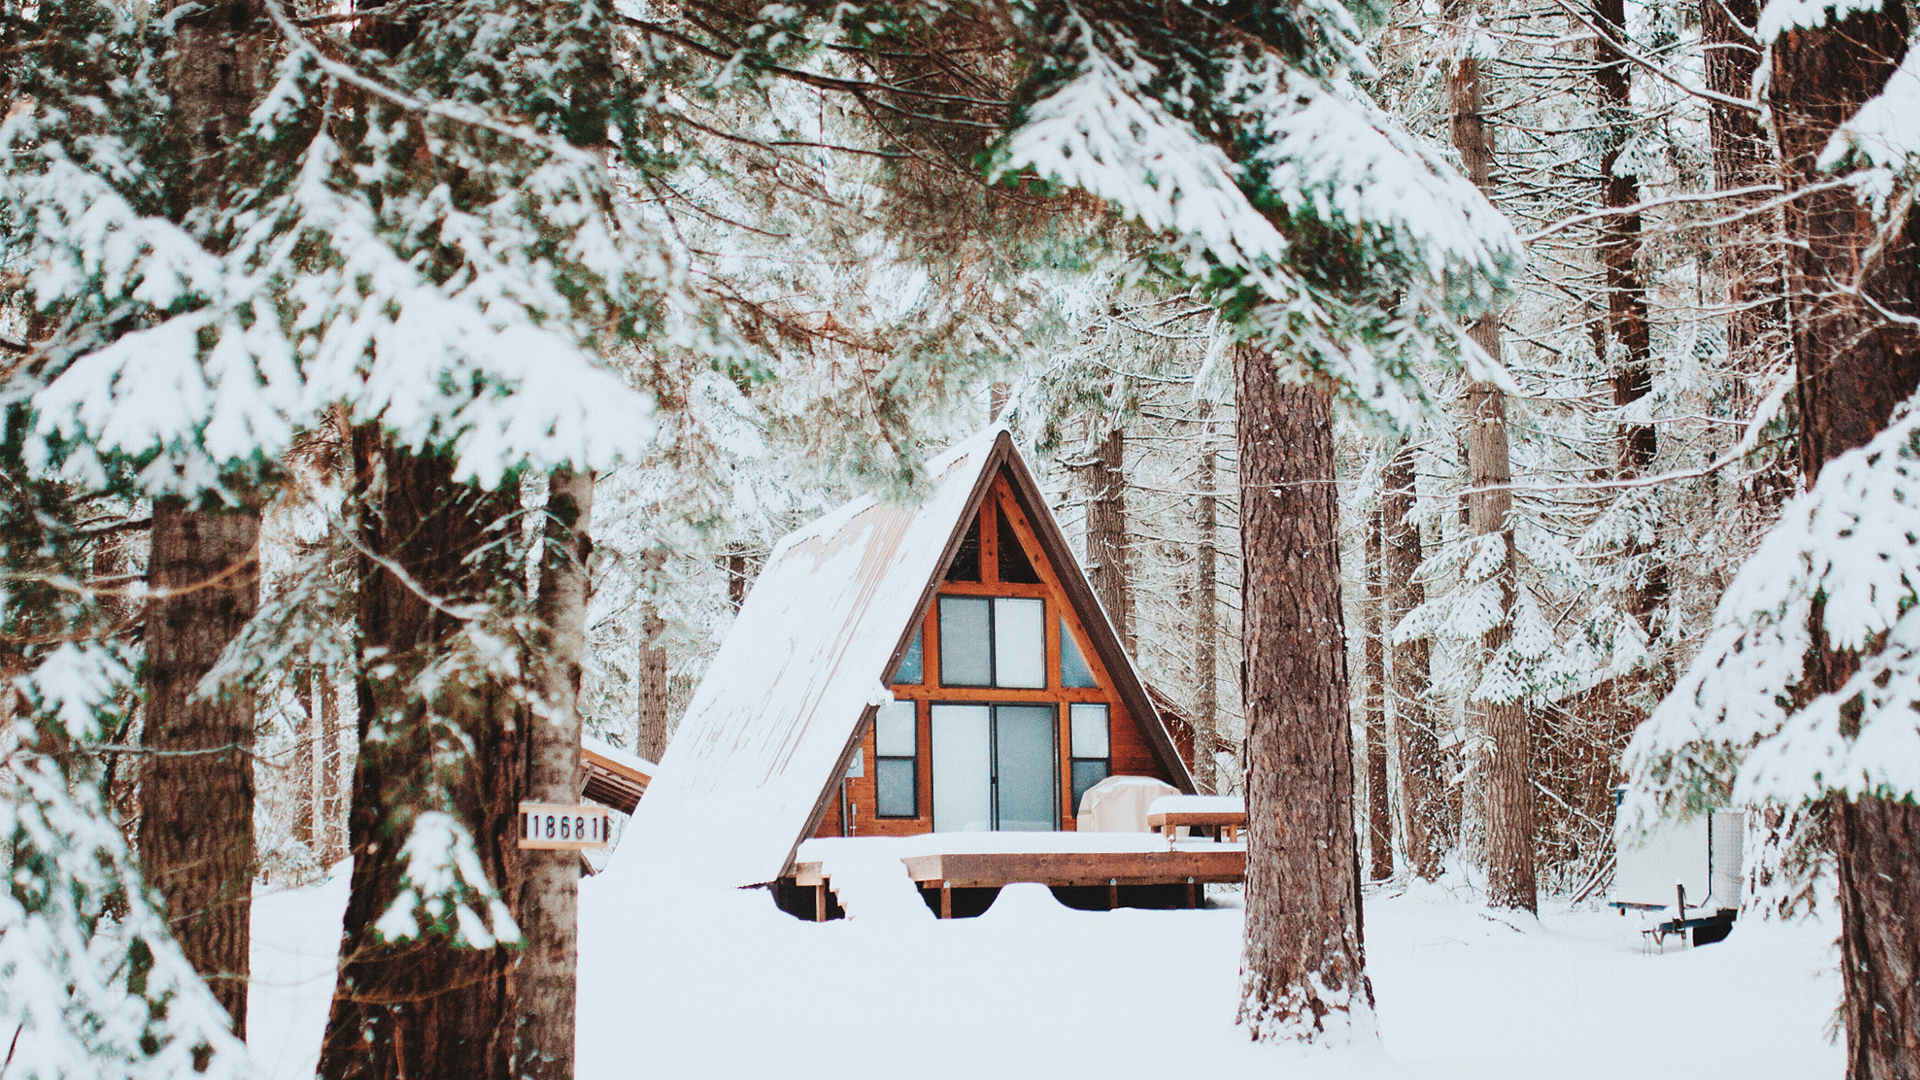 19 cozy winter cabins that make the cold enjoyable